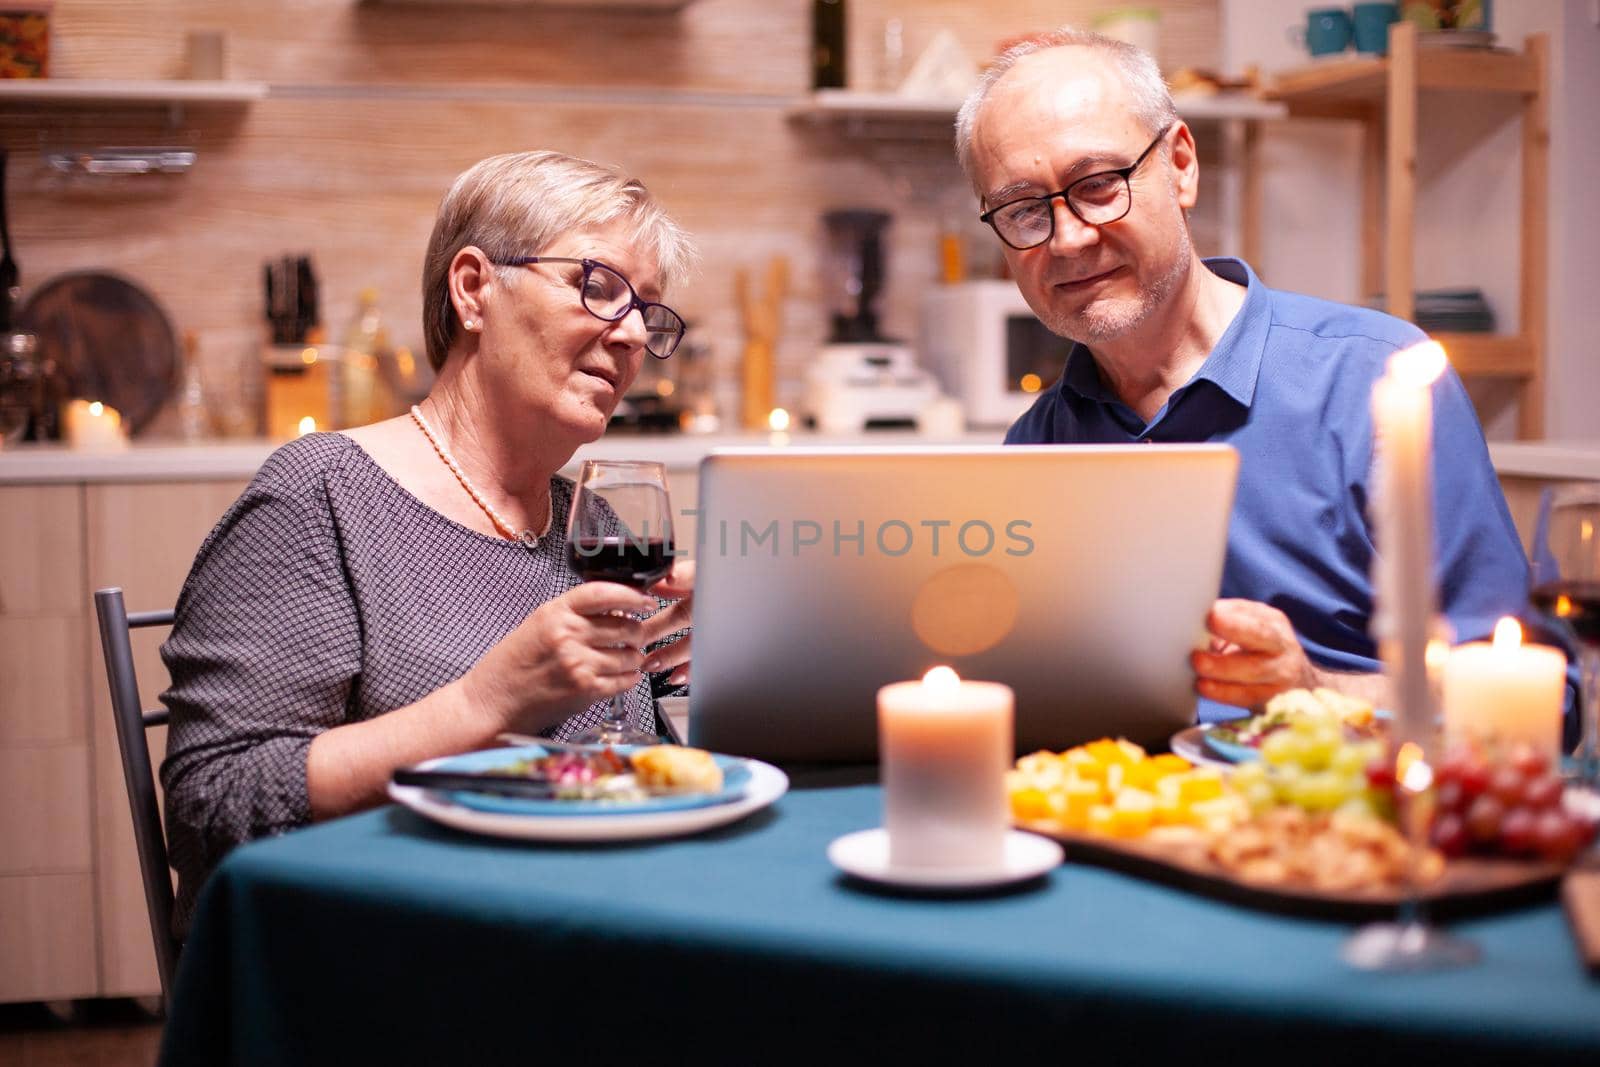 Aged man using laptop in kitchen during relationship celebration with wife. Elderly people sitting at the table browsing, searching, using laptop, technology, internet, celebrating their anniversary in the dining room.